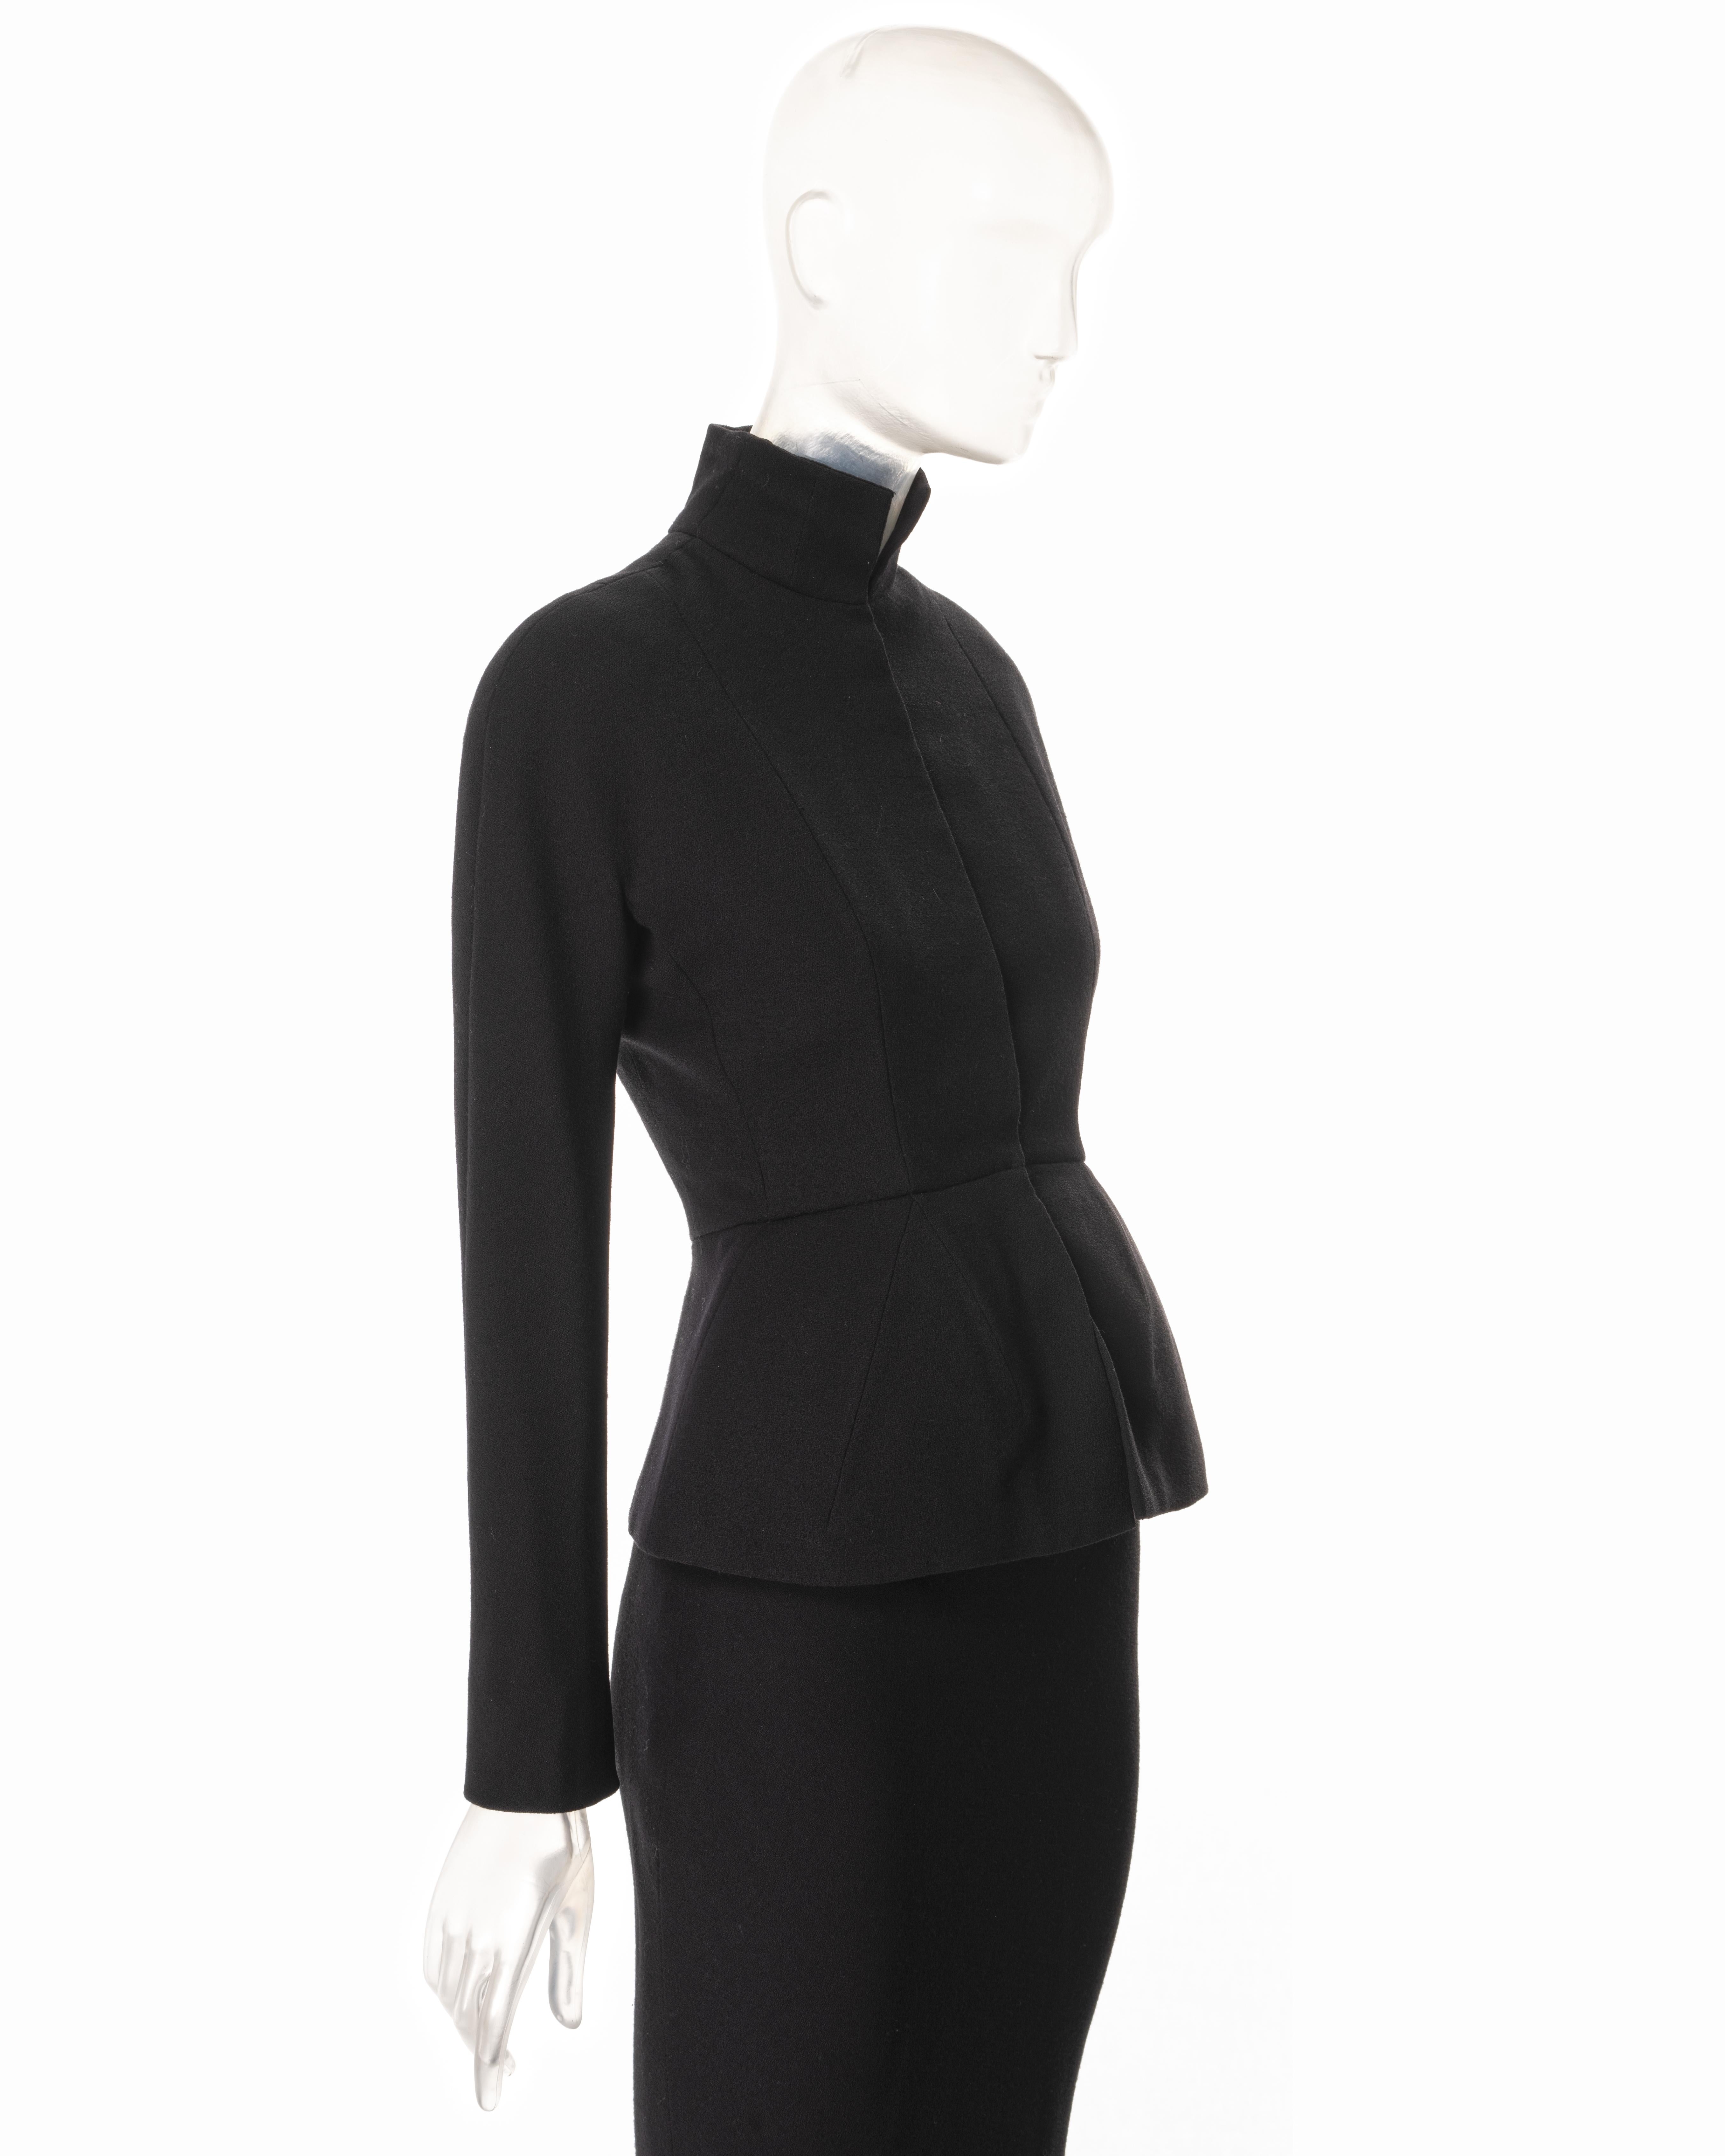 Women's Christian Dior by John Galliano black wool crepe haute-couture bar suit, fw 1998 For Sale